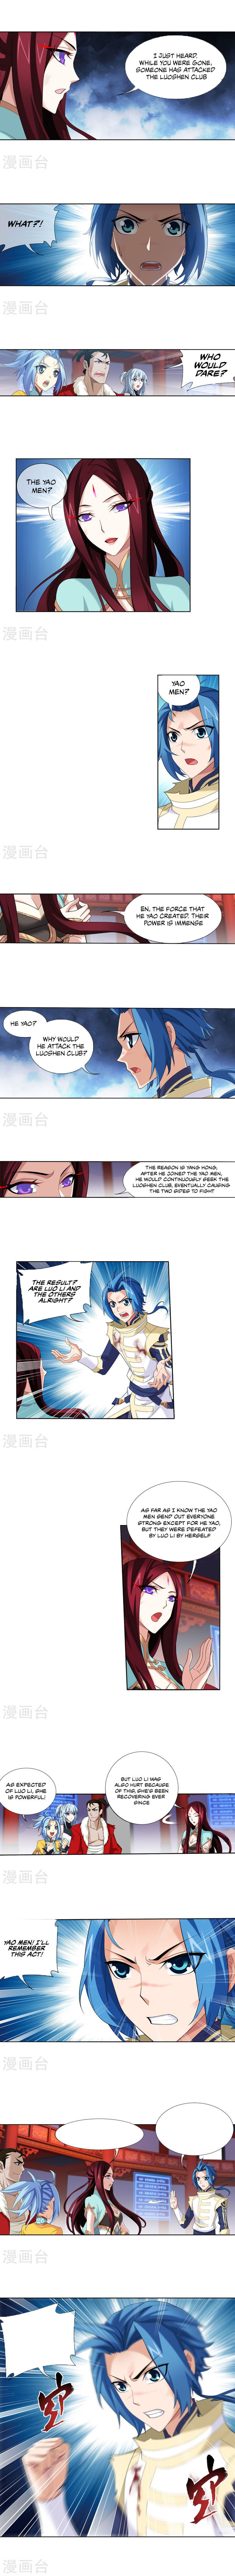 The Great Ruler Chapter 120 page 3